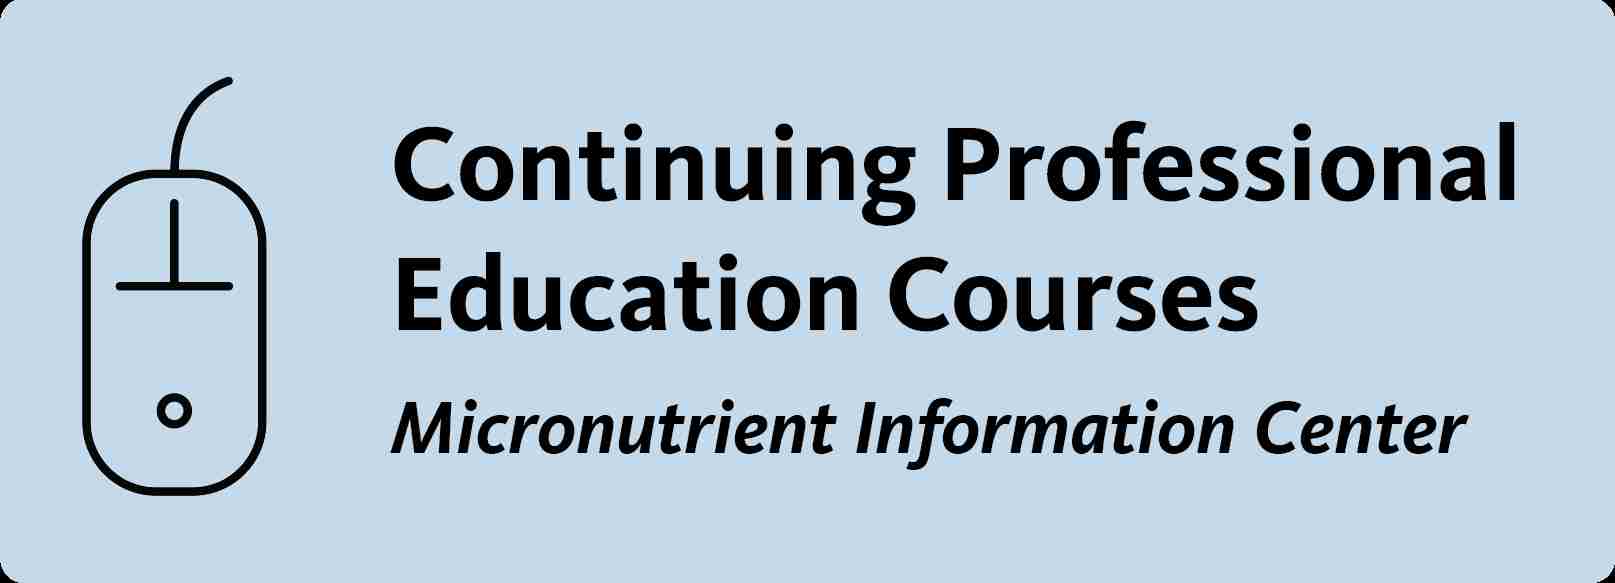 button to link to page that list the LPI continuing education courses for healthcare professionals